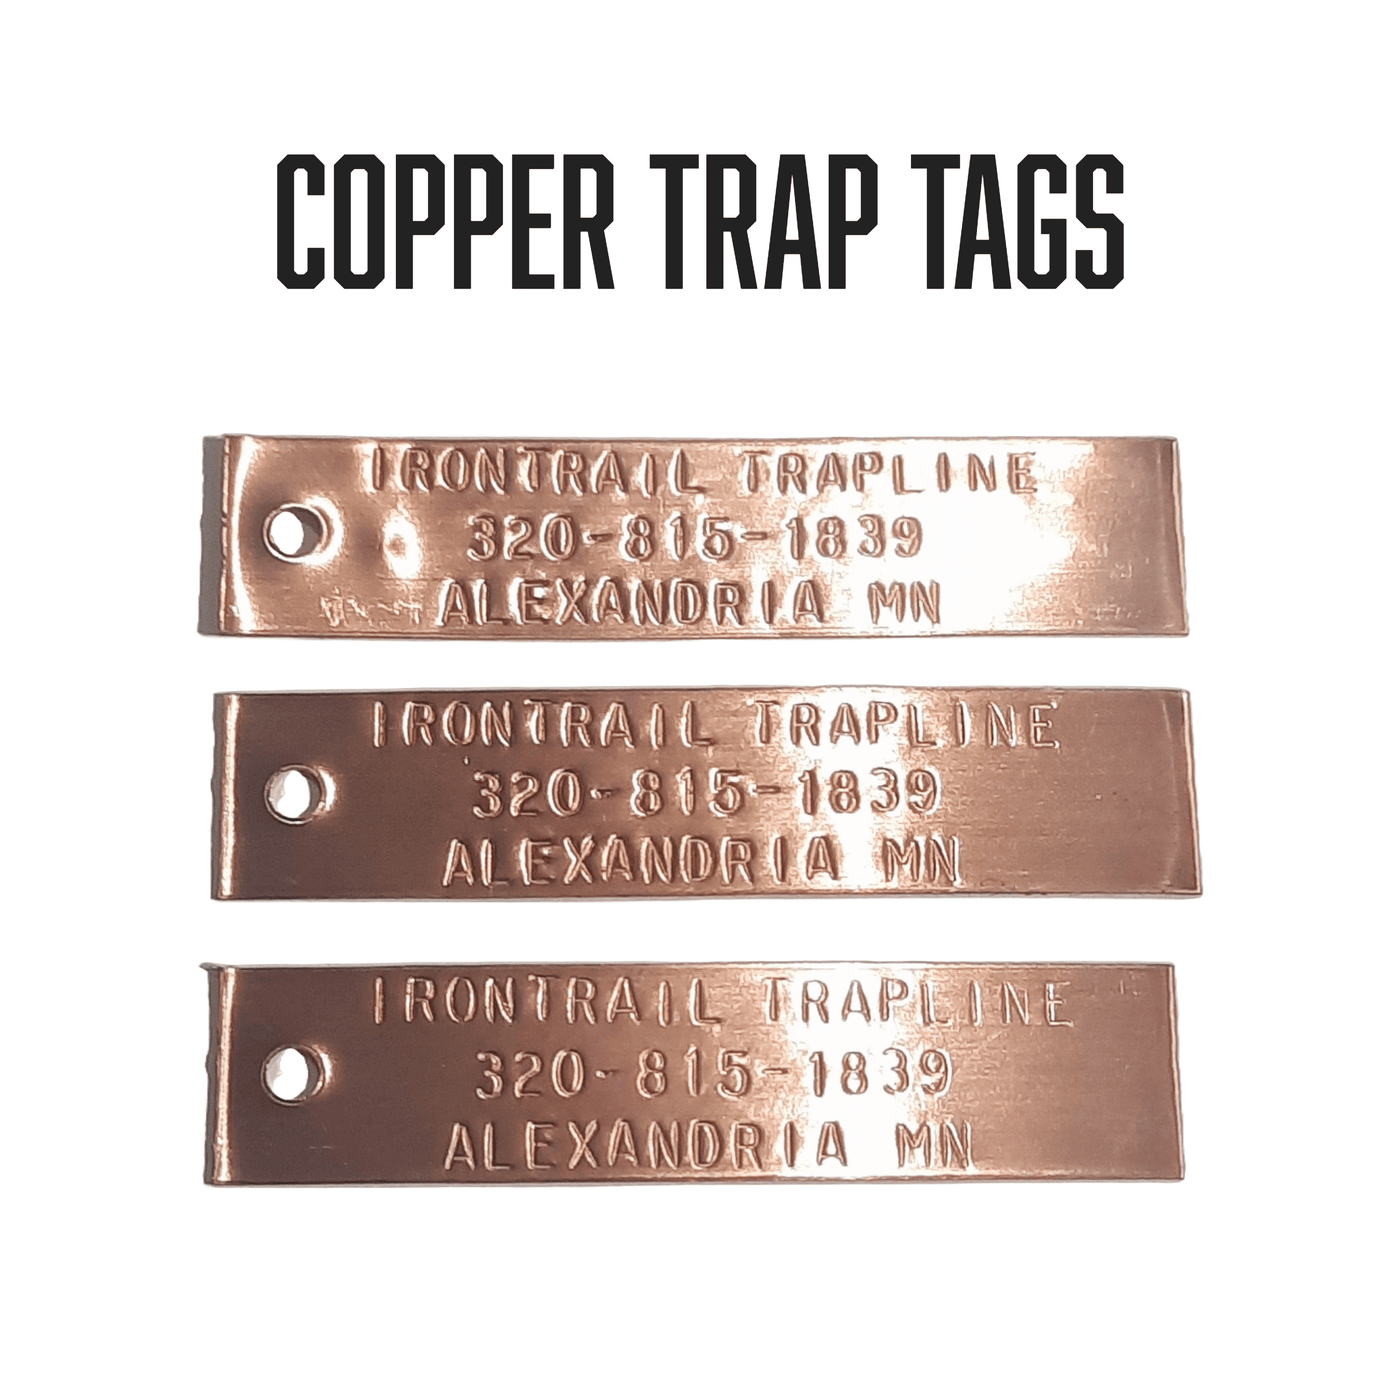 QTY 150-ENGRAVED COPPER TRAP TAGS/TRAPPING SUPPLIES/TRAP/ANIMAL